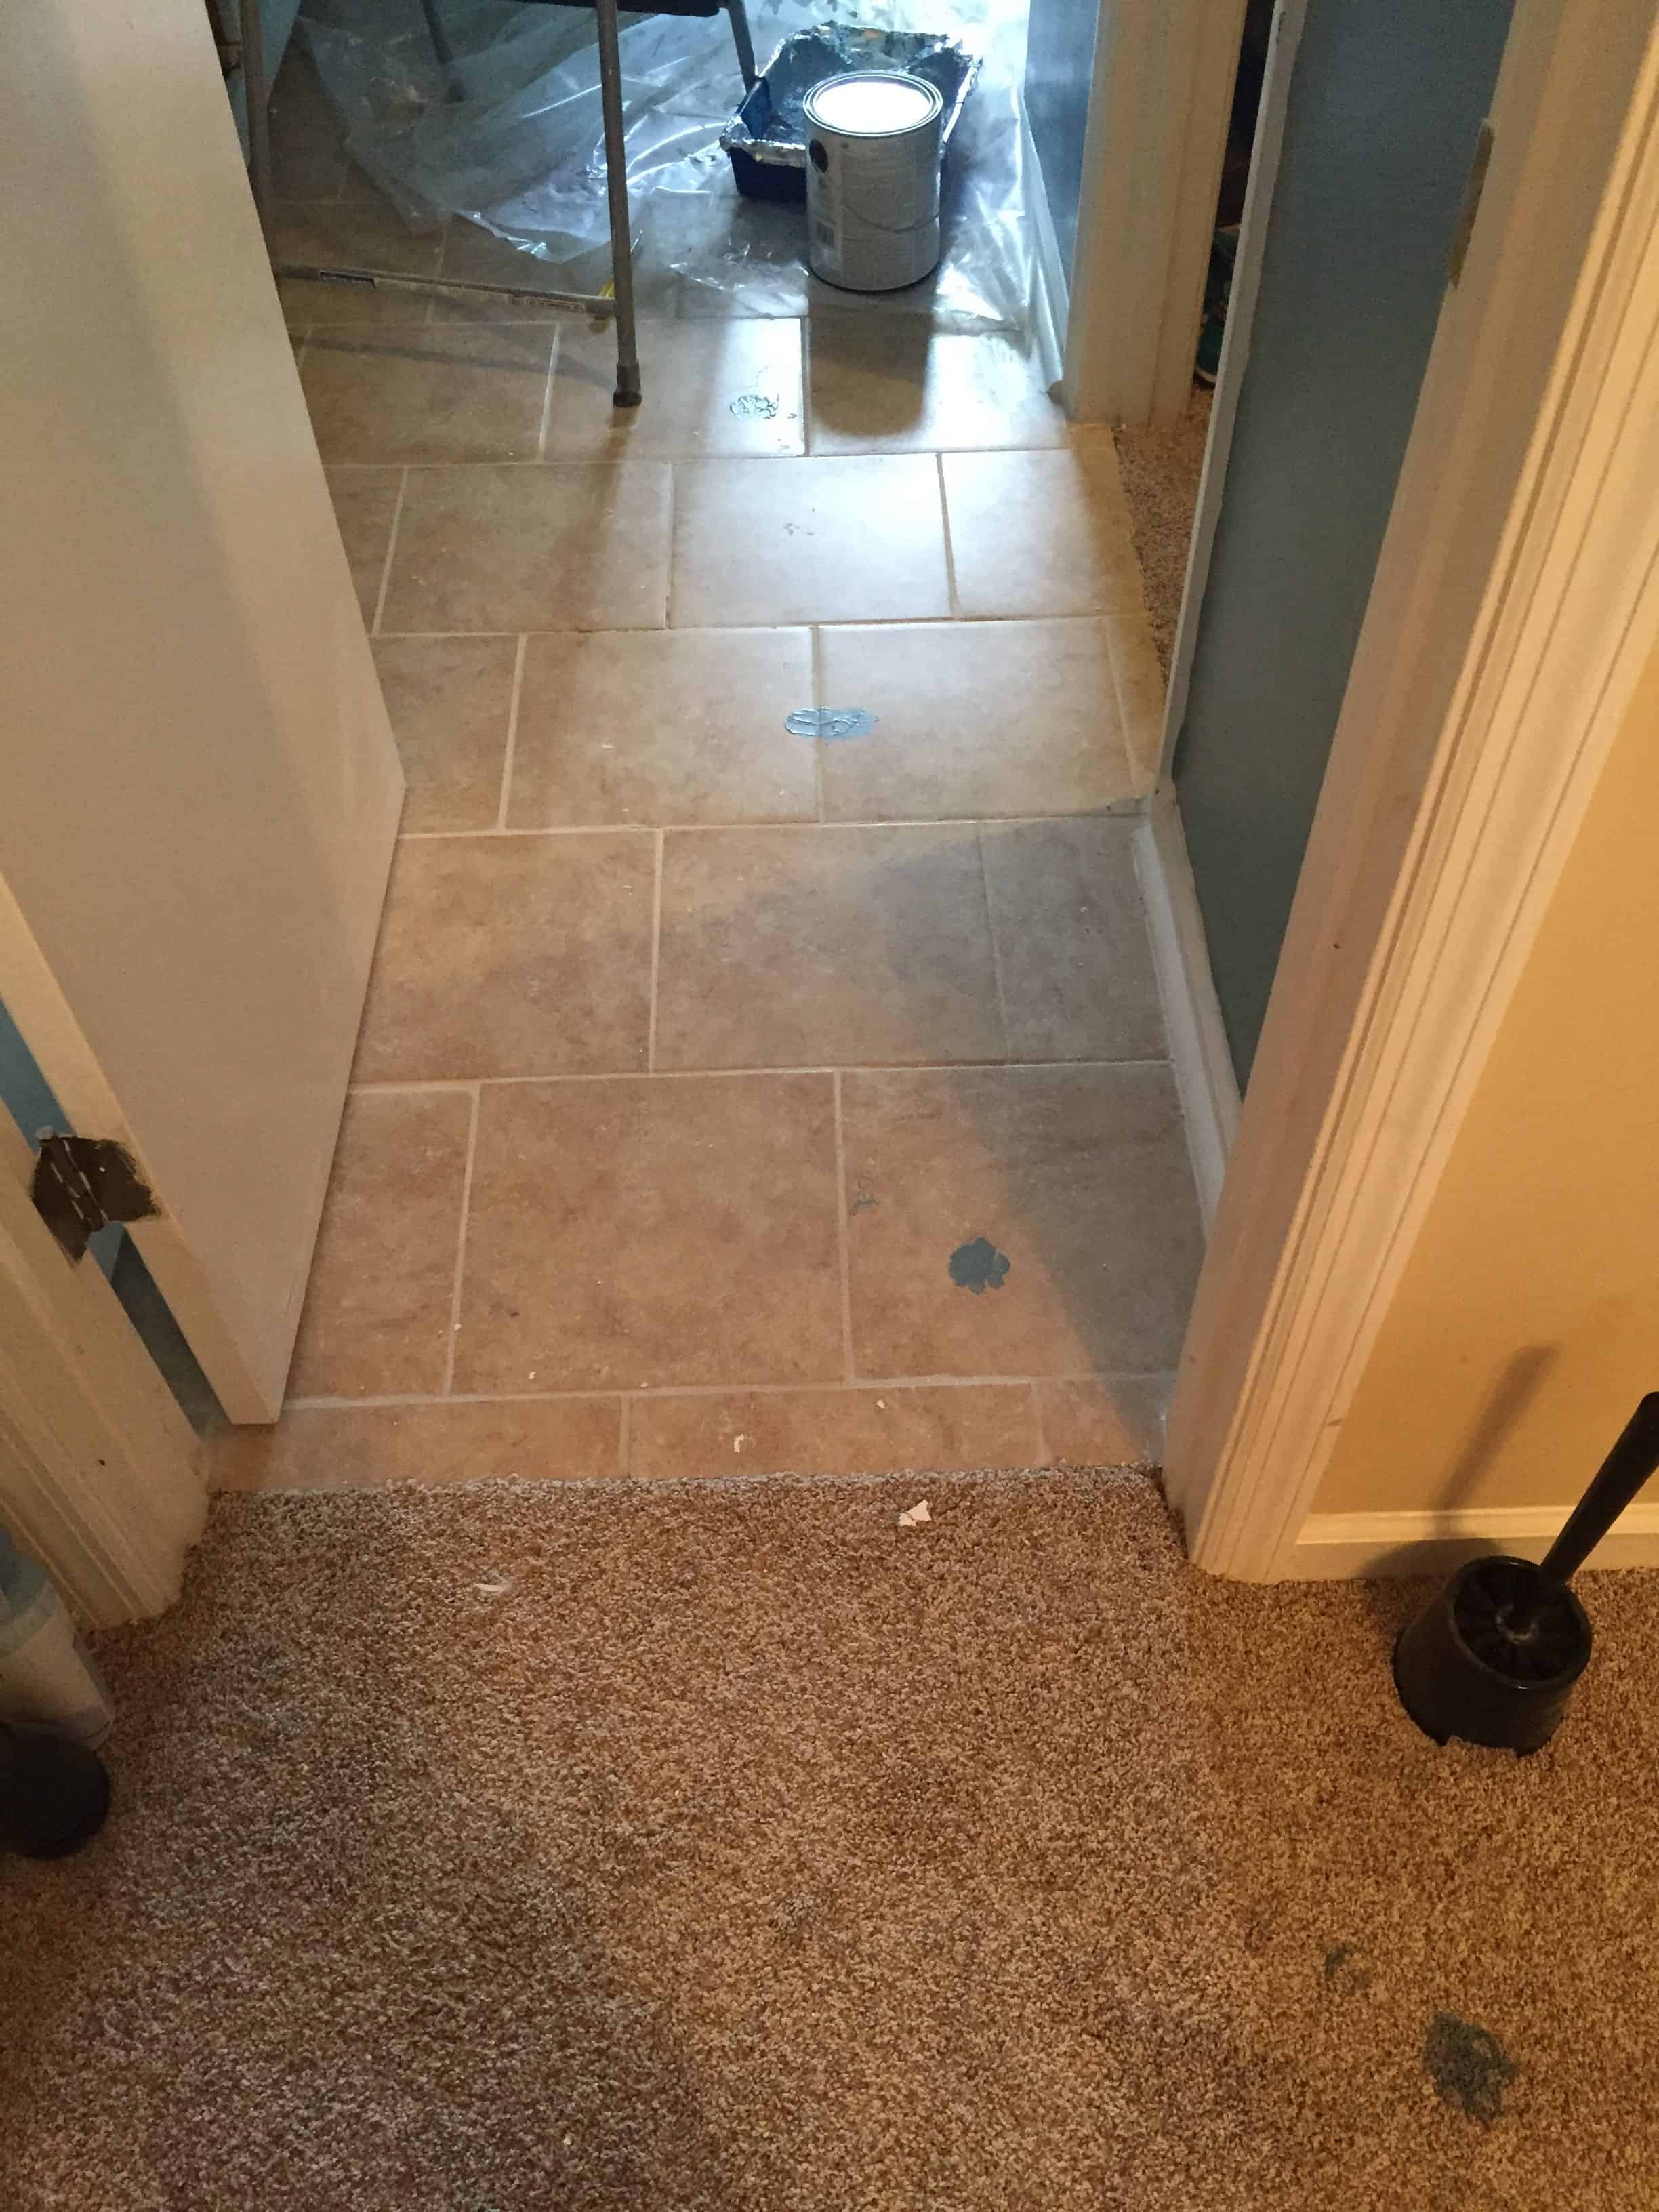 Homeowner Fail: How to get Dried Paint off of Carpet